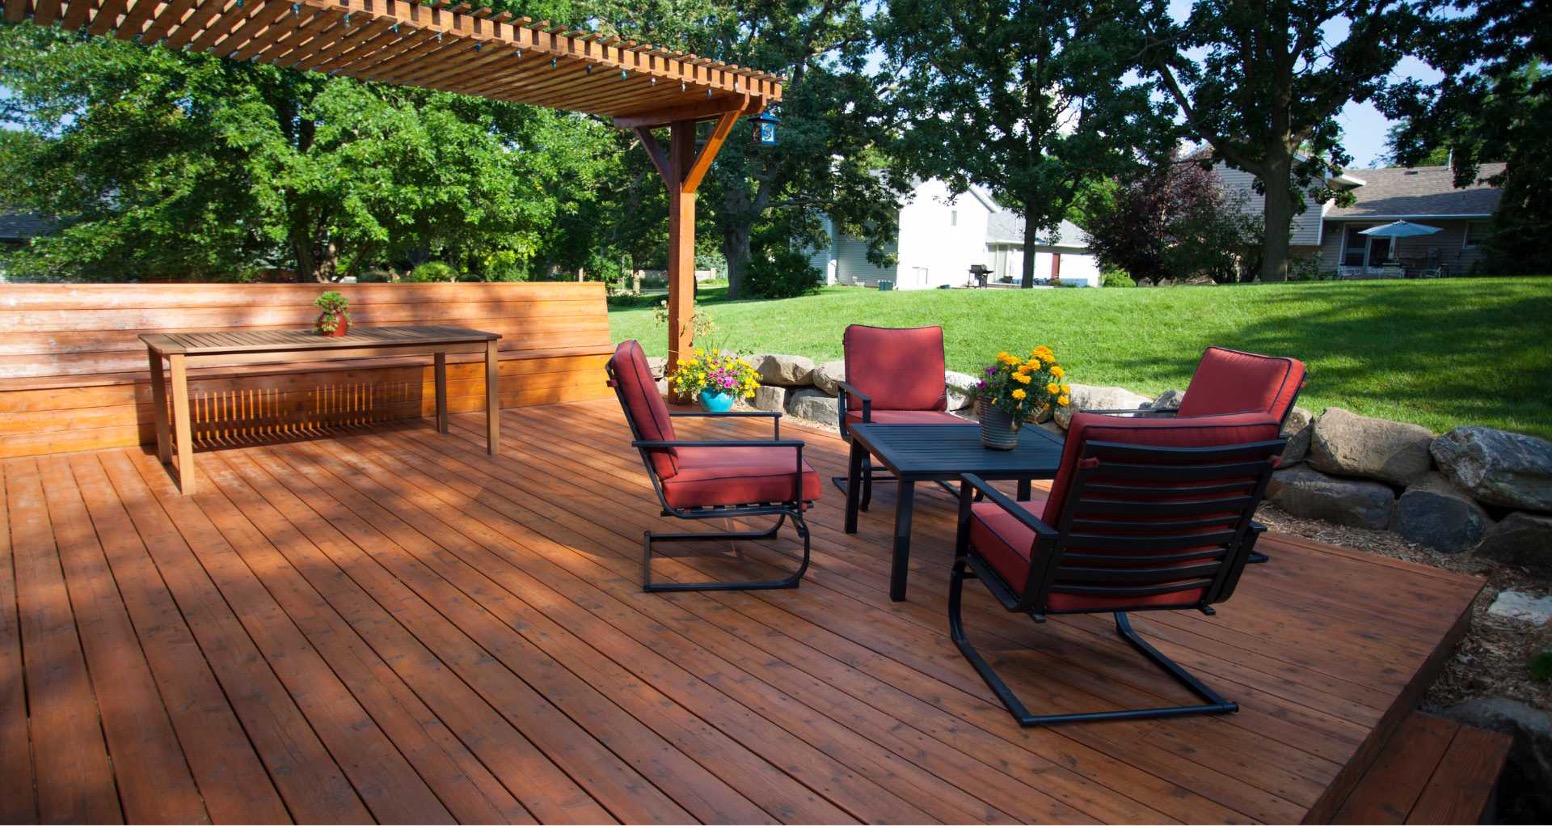 How To Choose The Best Deck Size And Shape For Your Home?